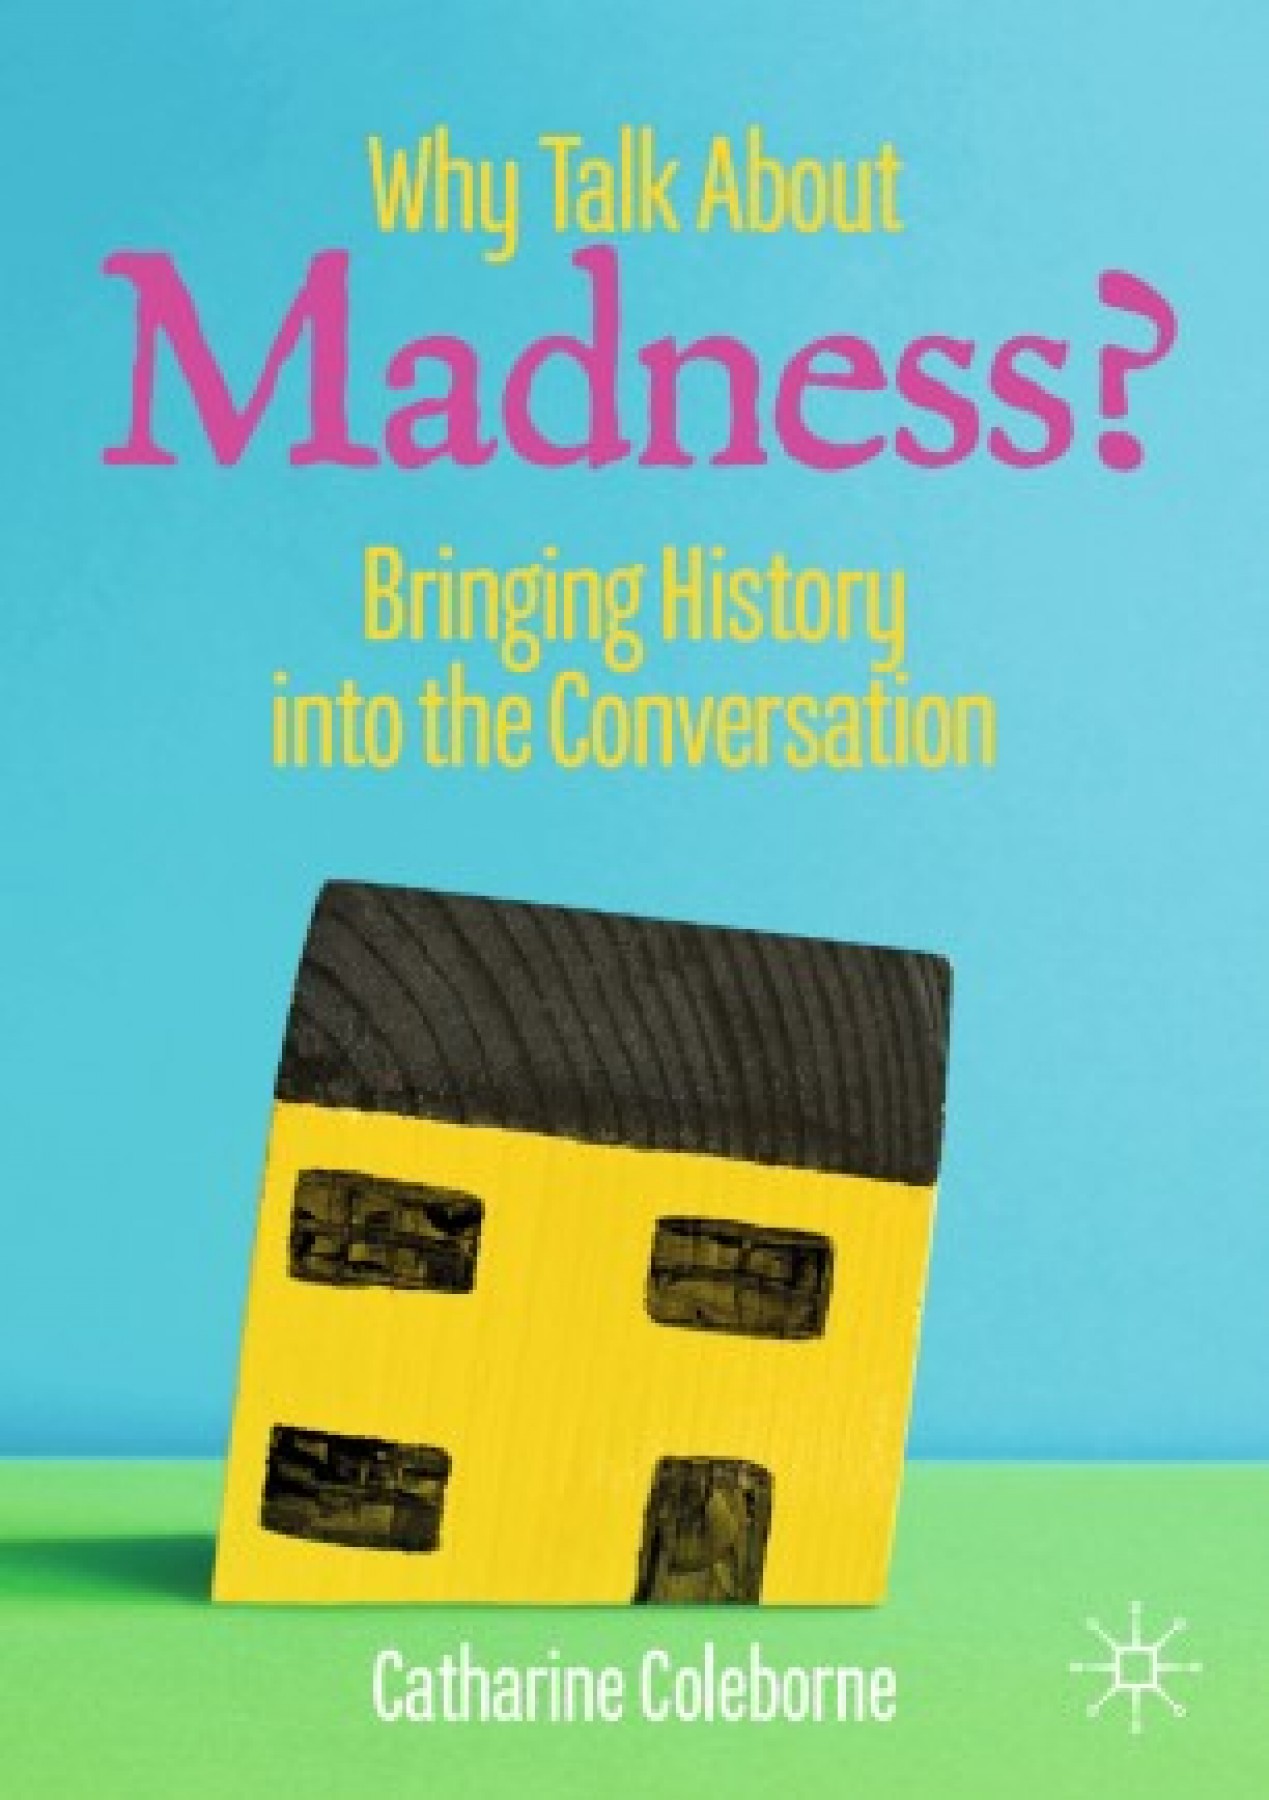 Why talk about madness: Bringing history into the conversation